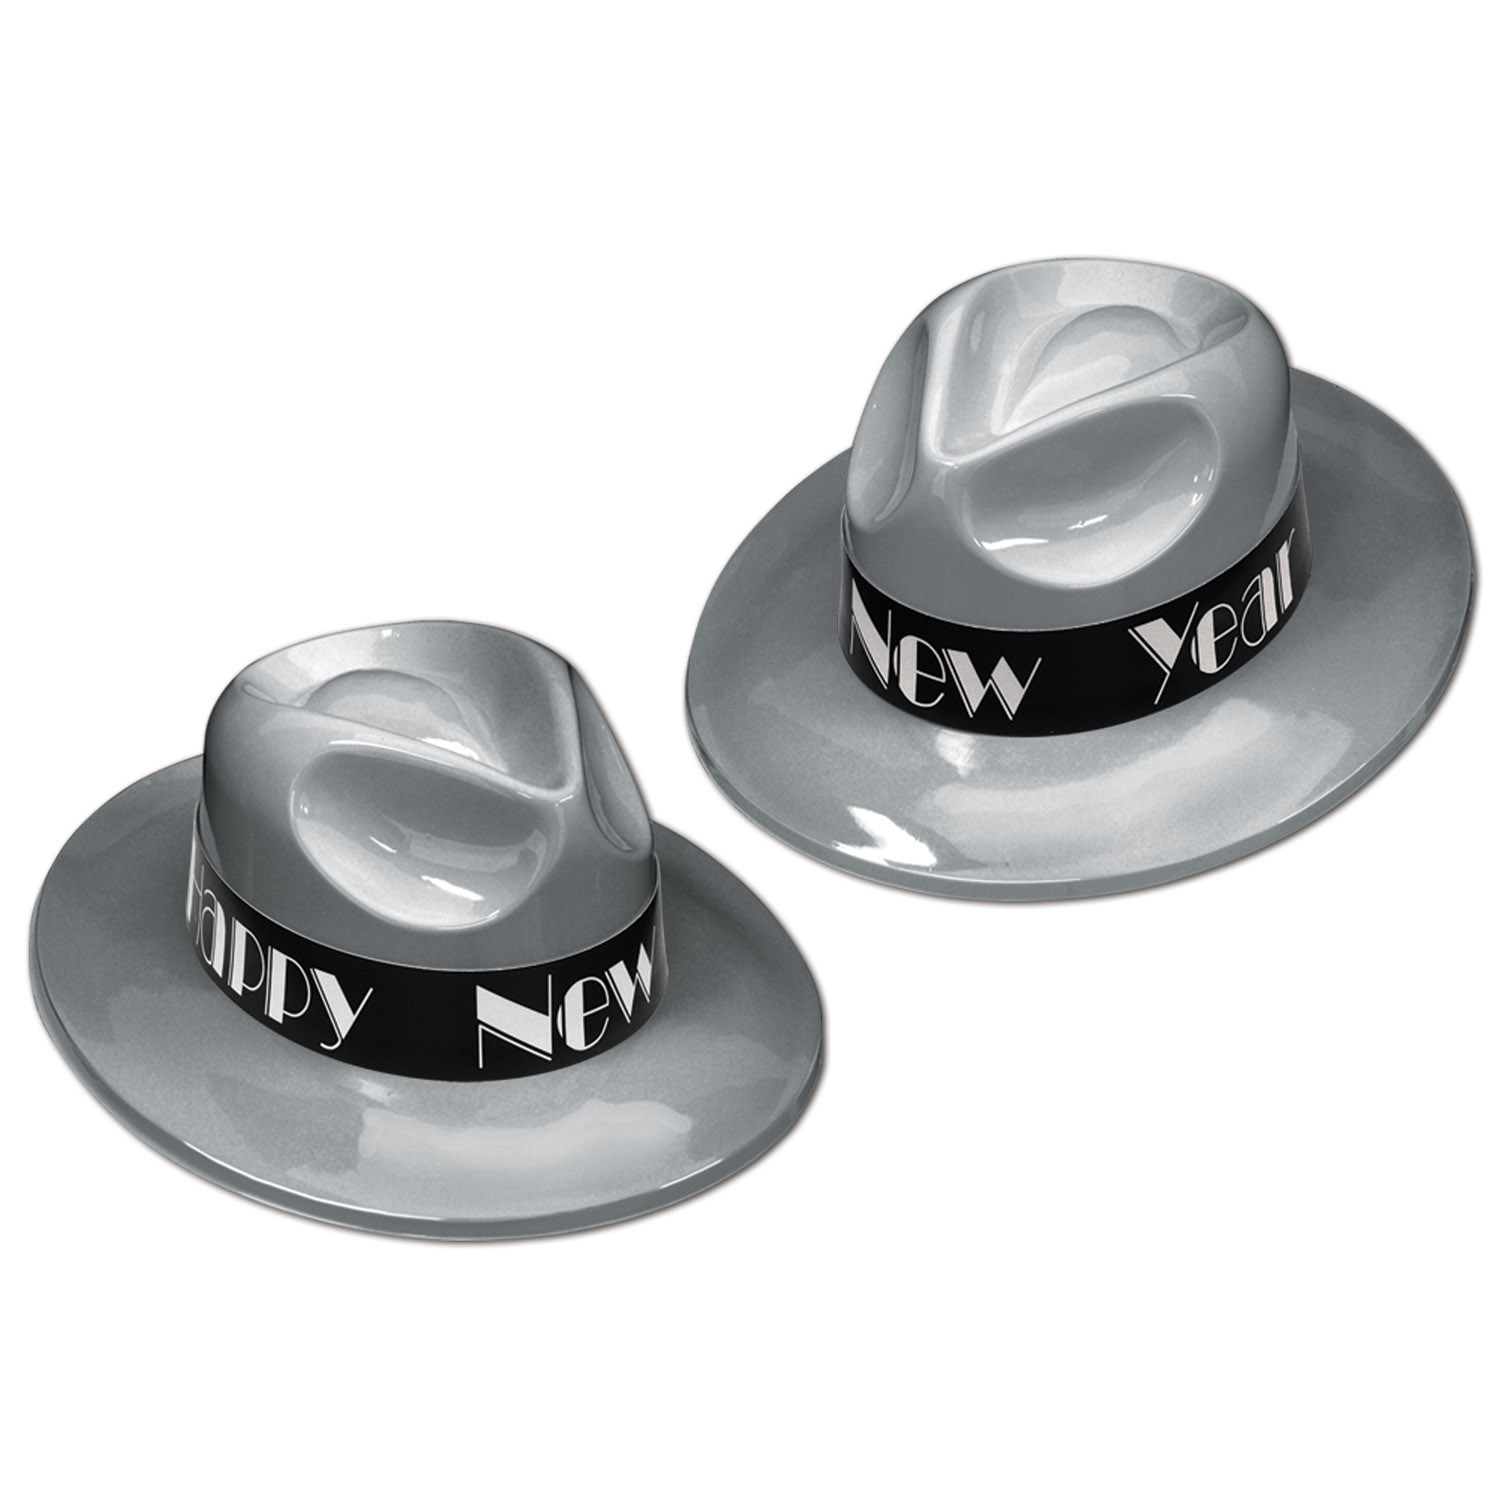 Silver plastic material molded to a fedora with a back band and the words "Happy New Year" in white.